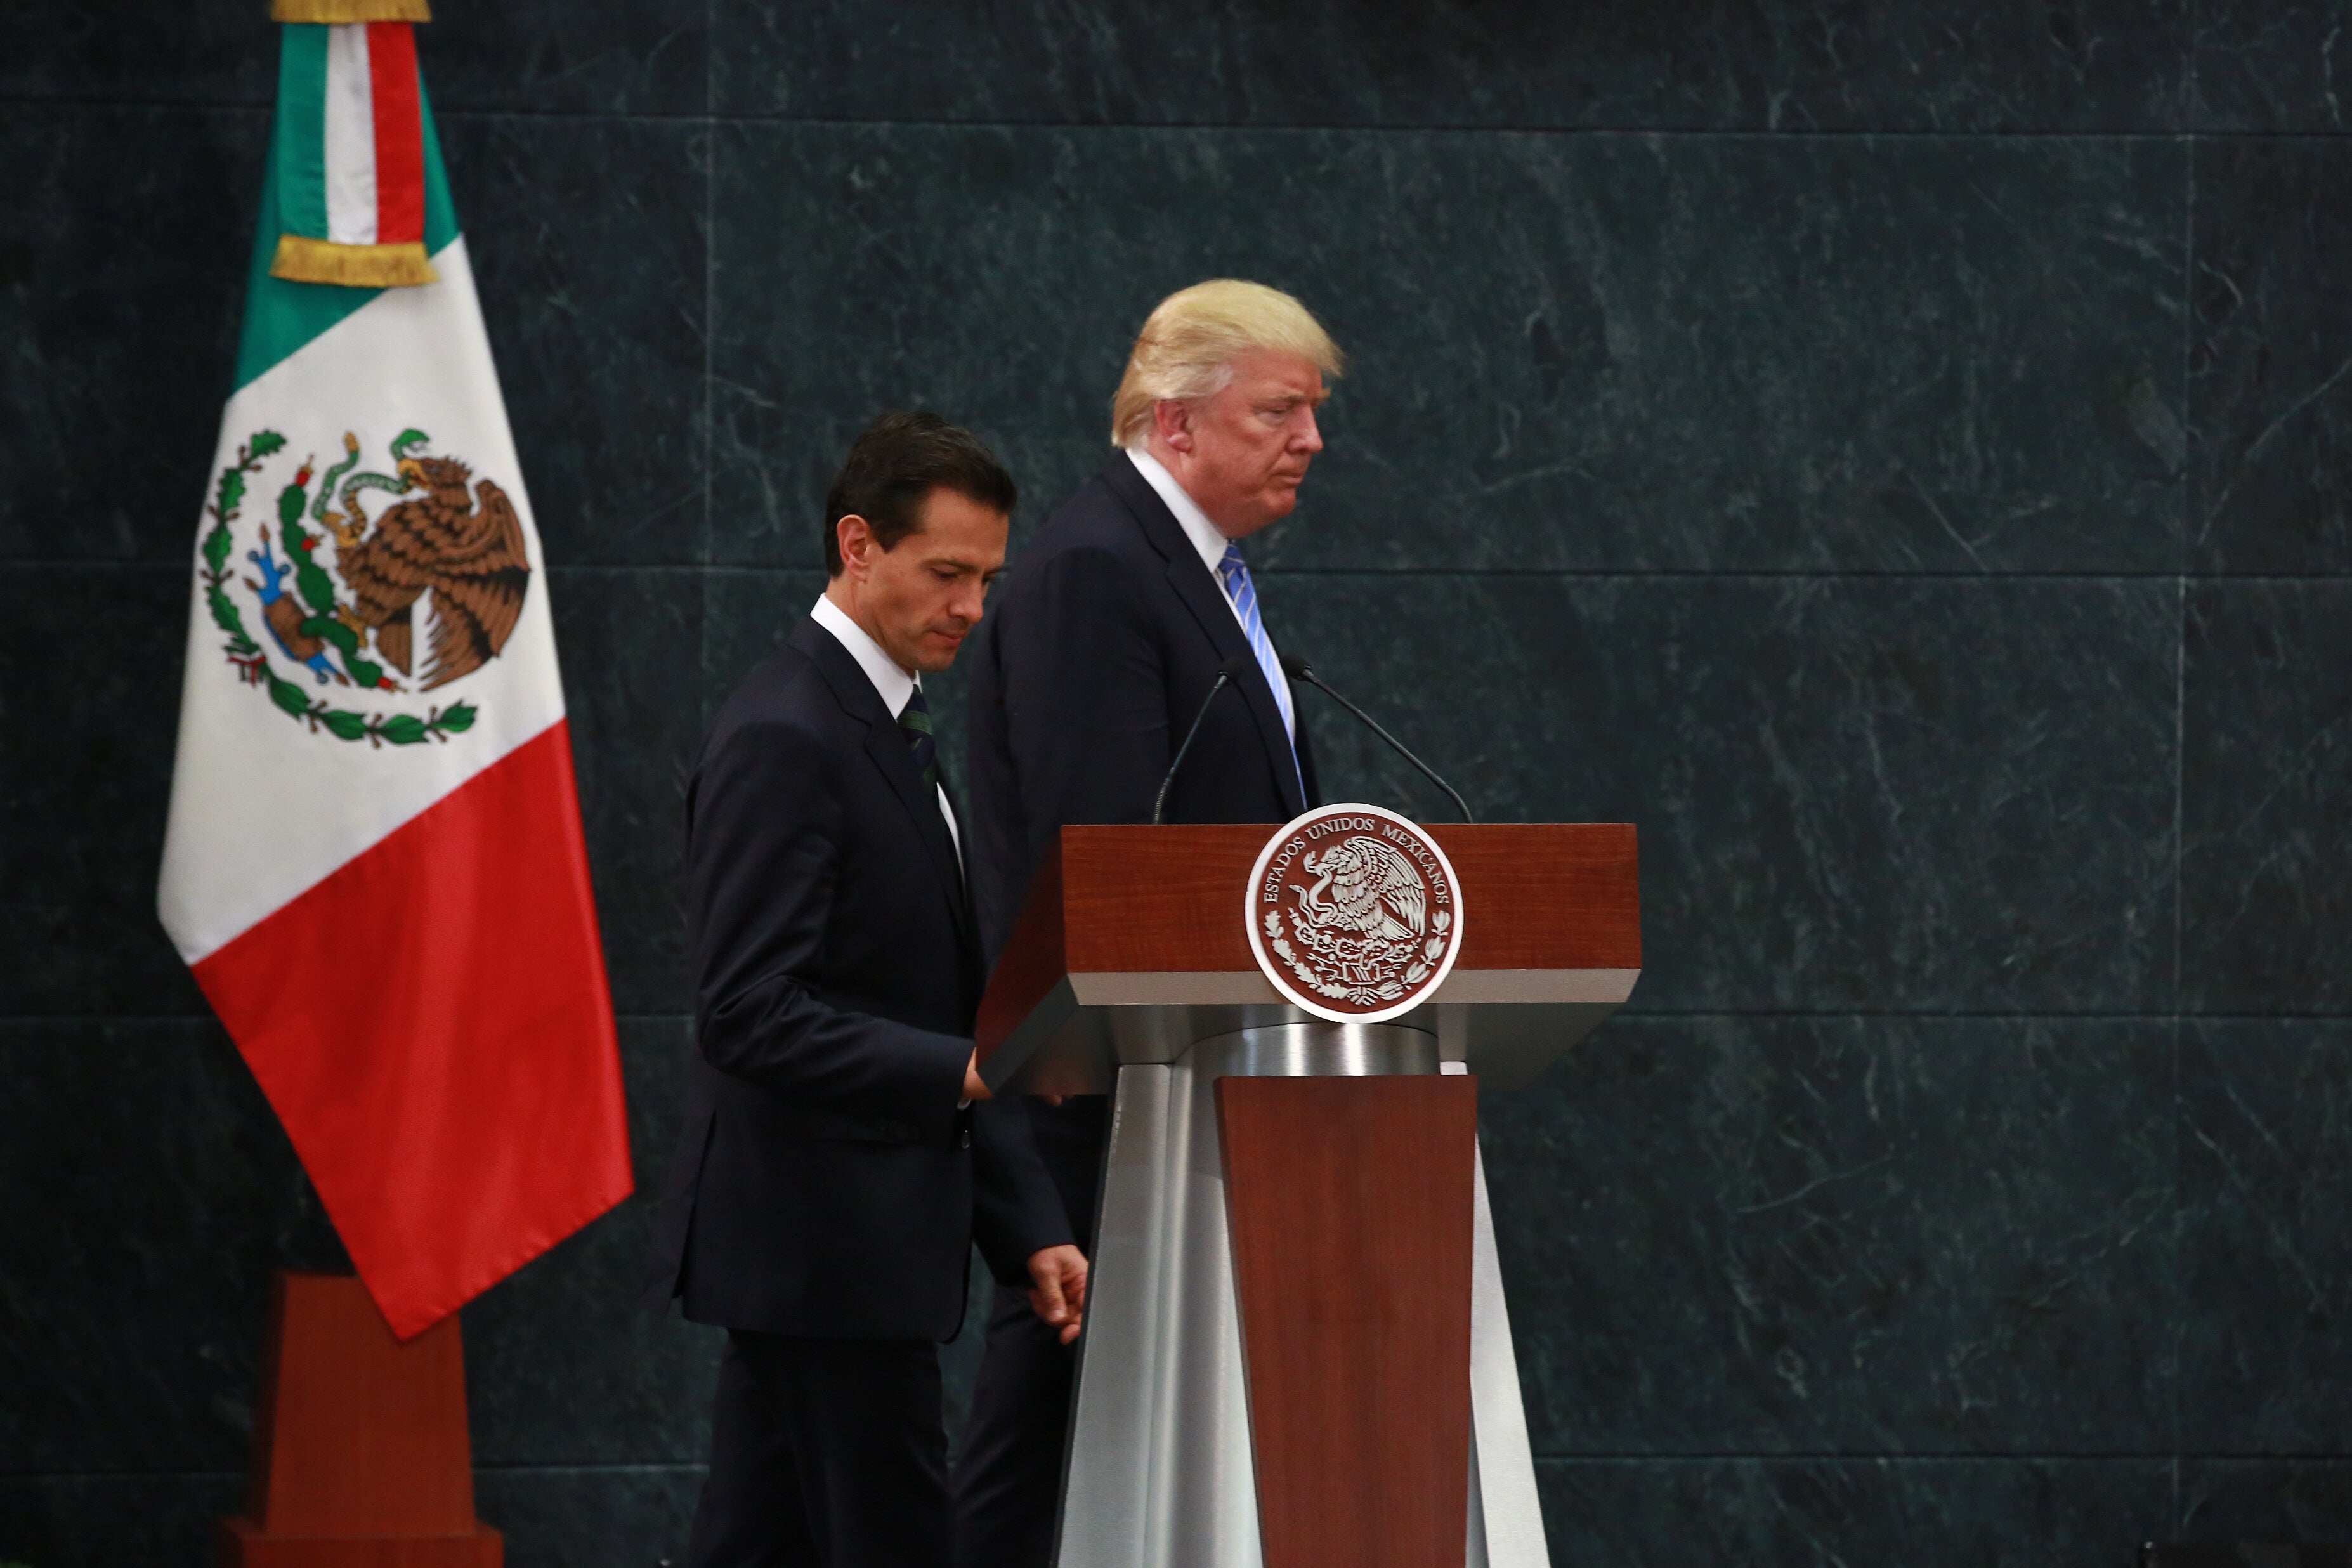 Shocker: U.S. Relations With Mexico Are Not In A Good Place
